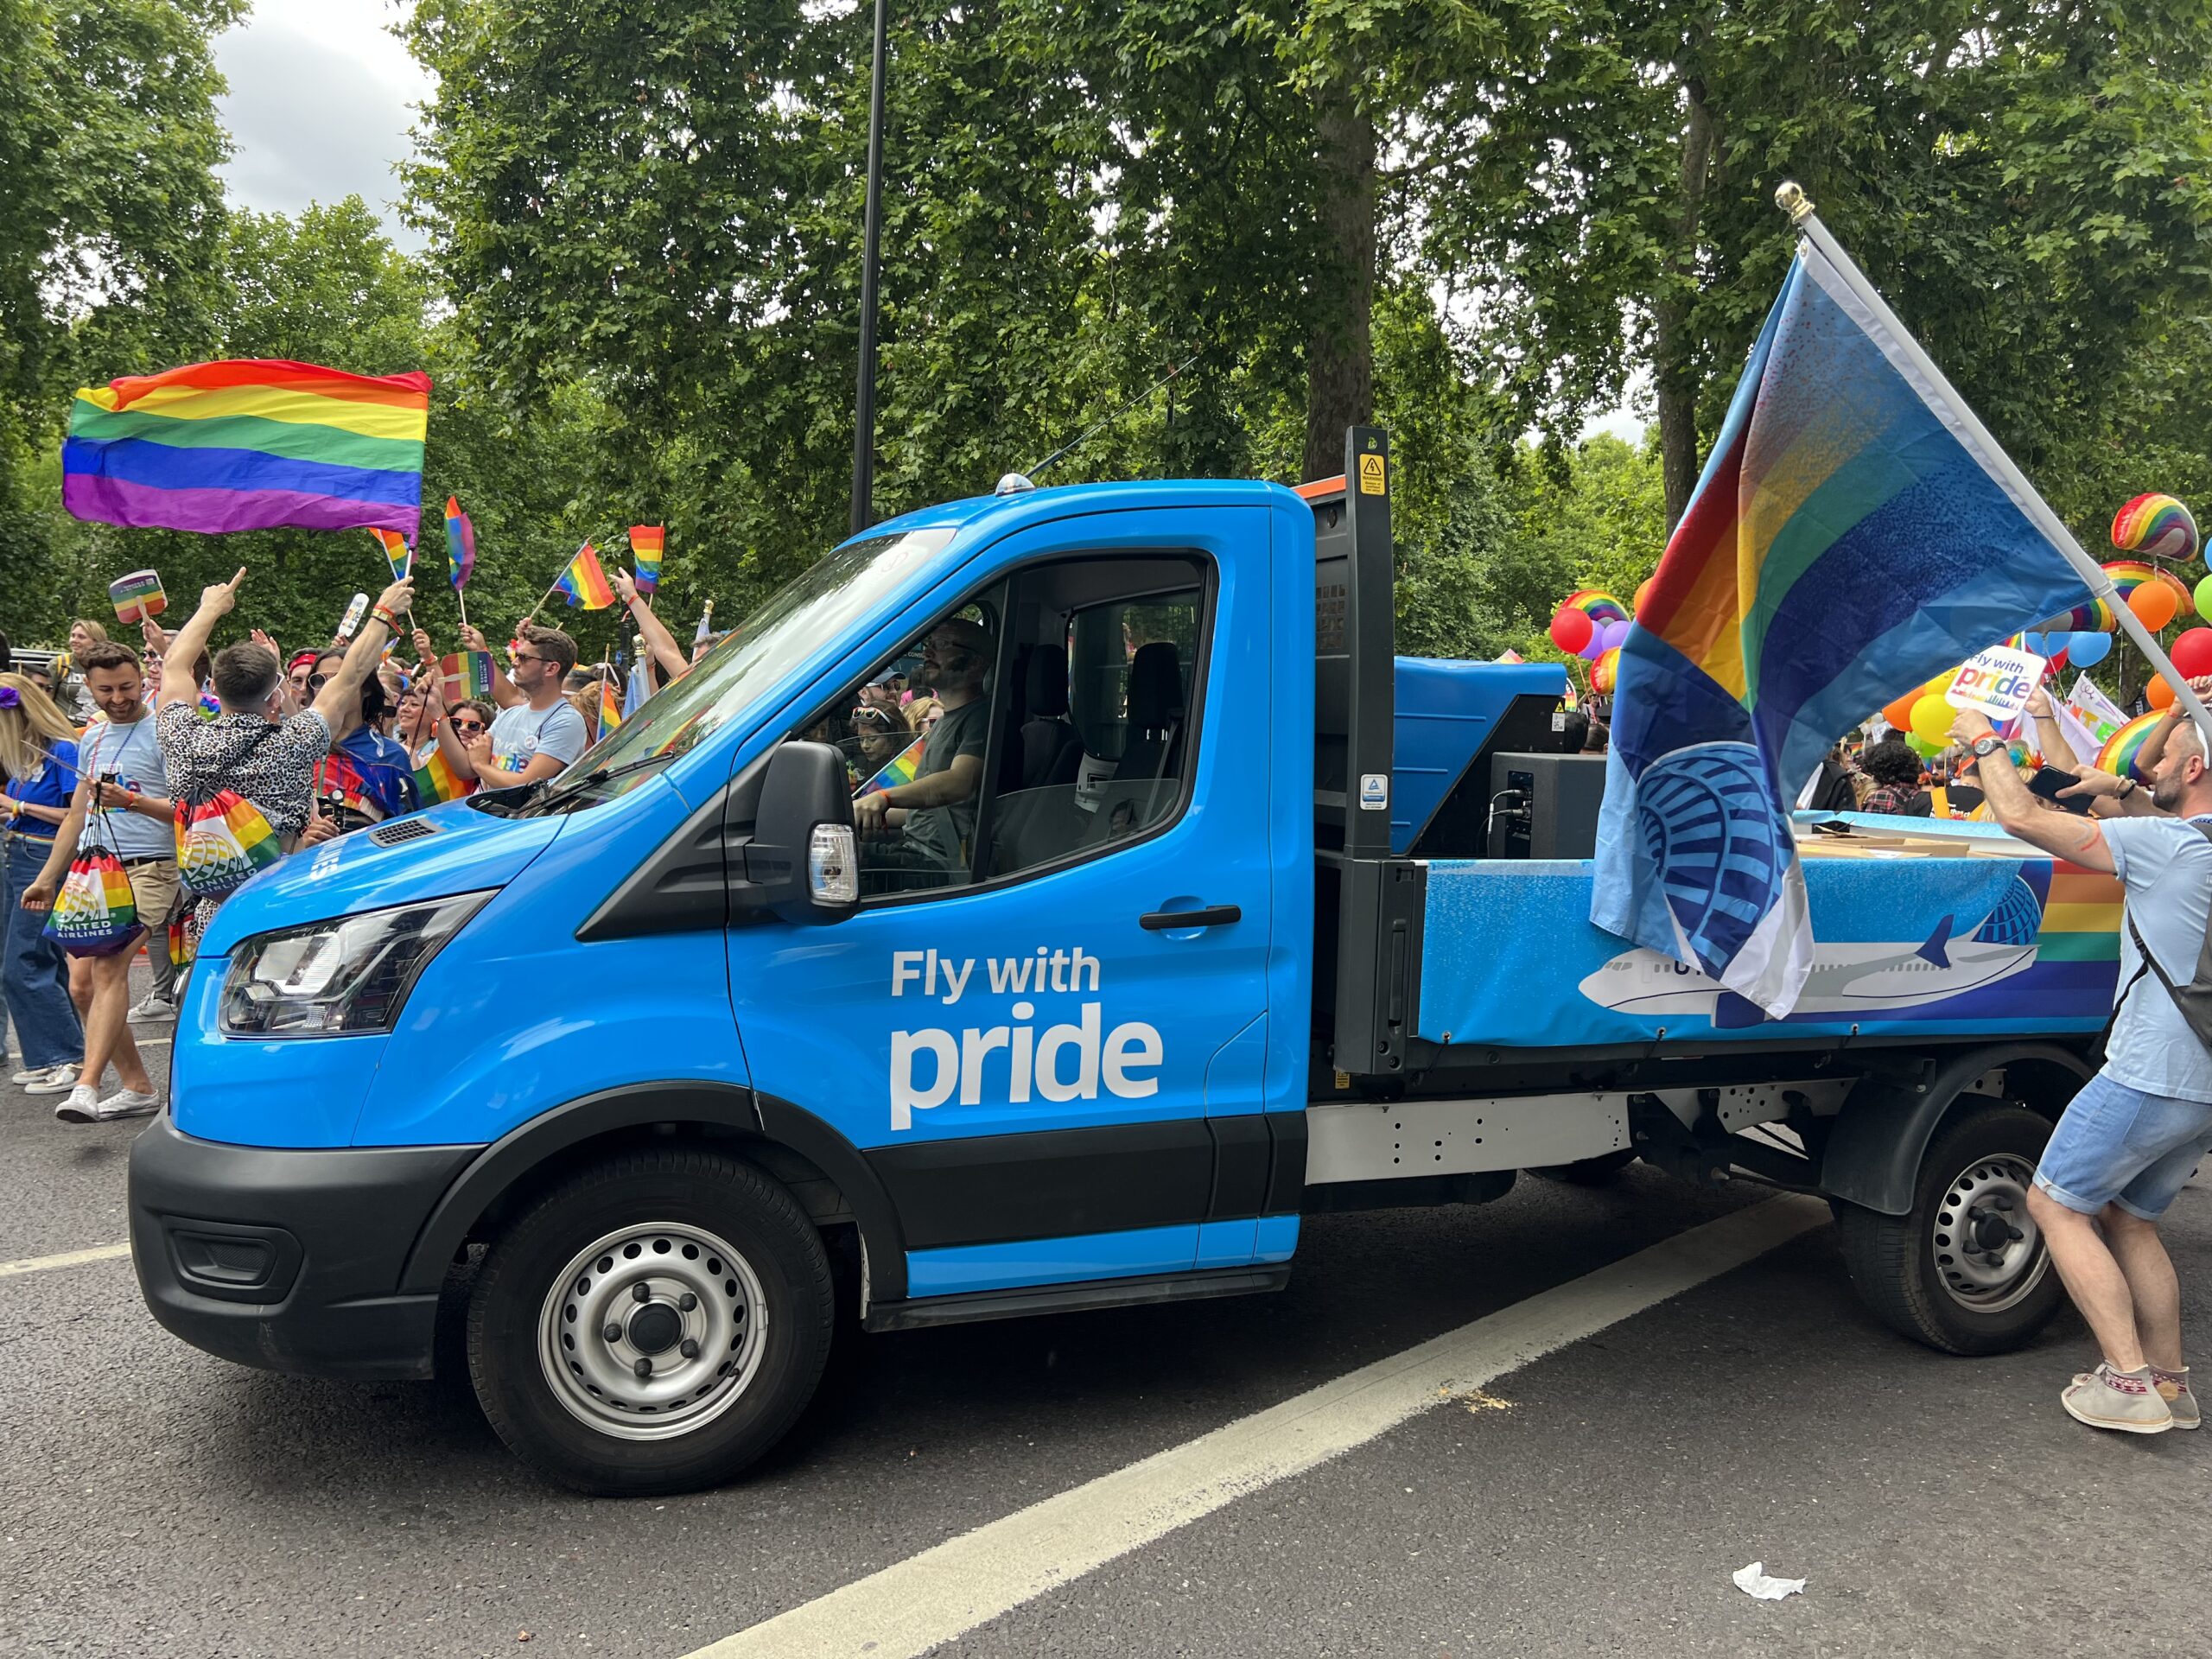 London pride experiential mobile activation. Nvs visuals international and nation wide mobile campaigns